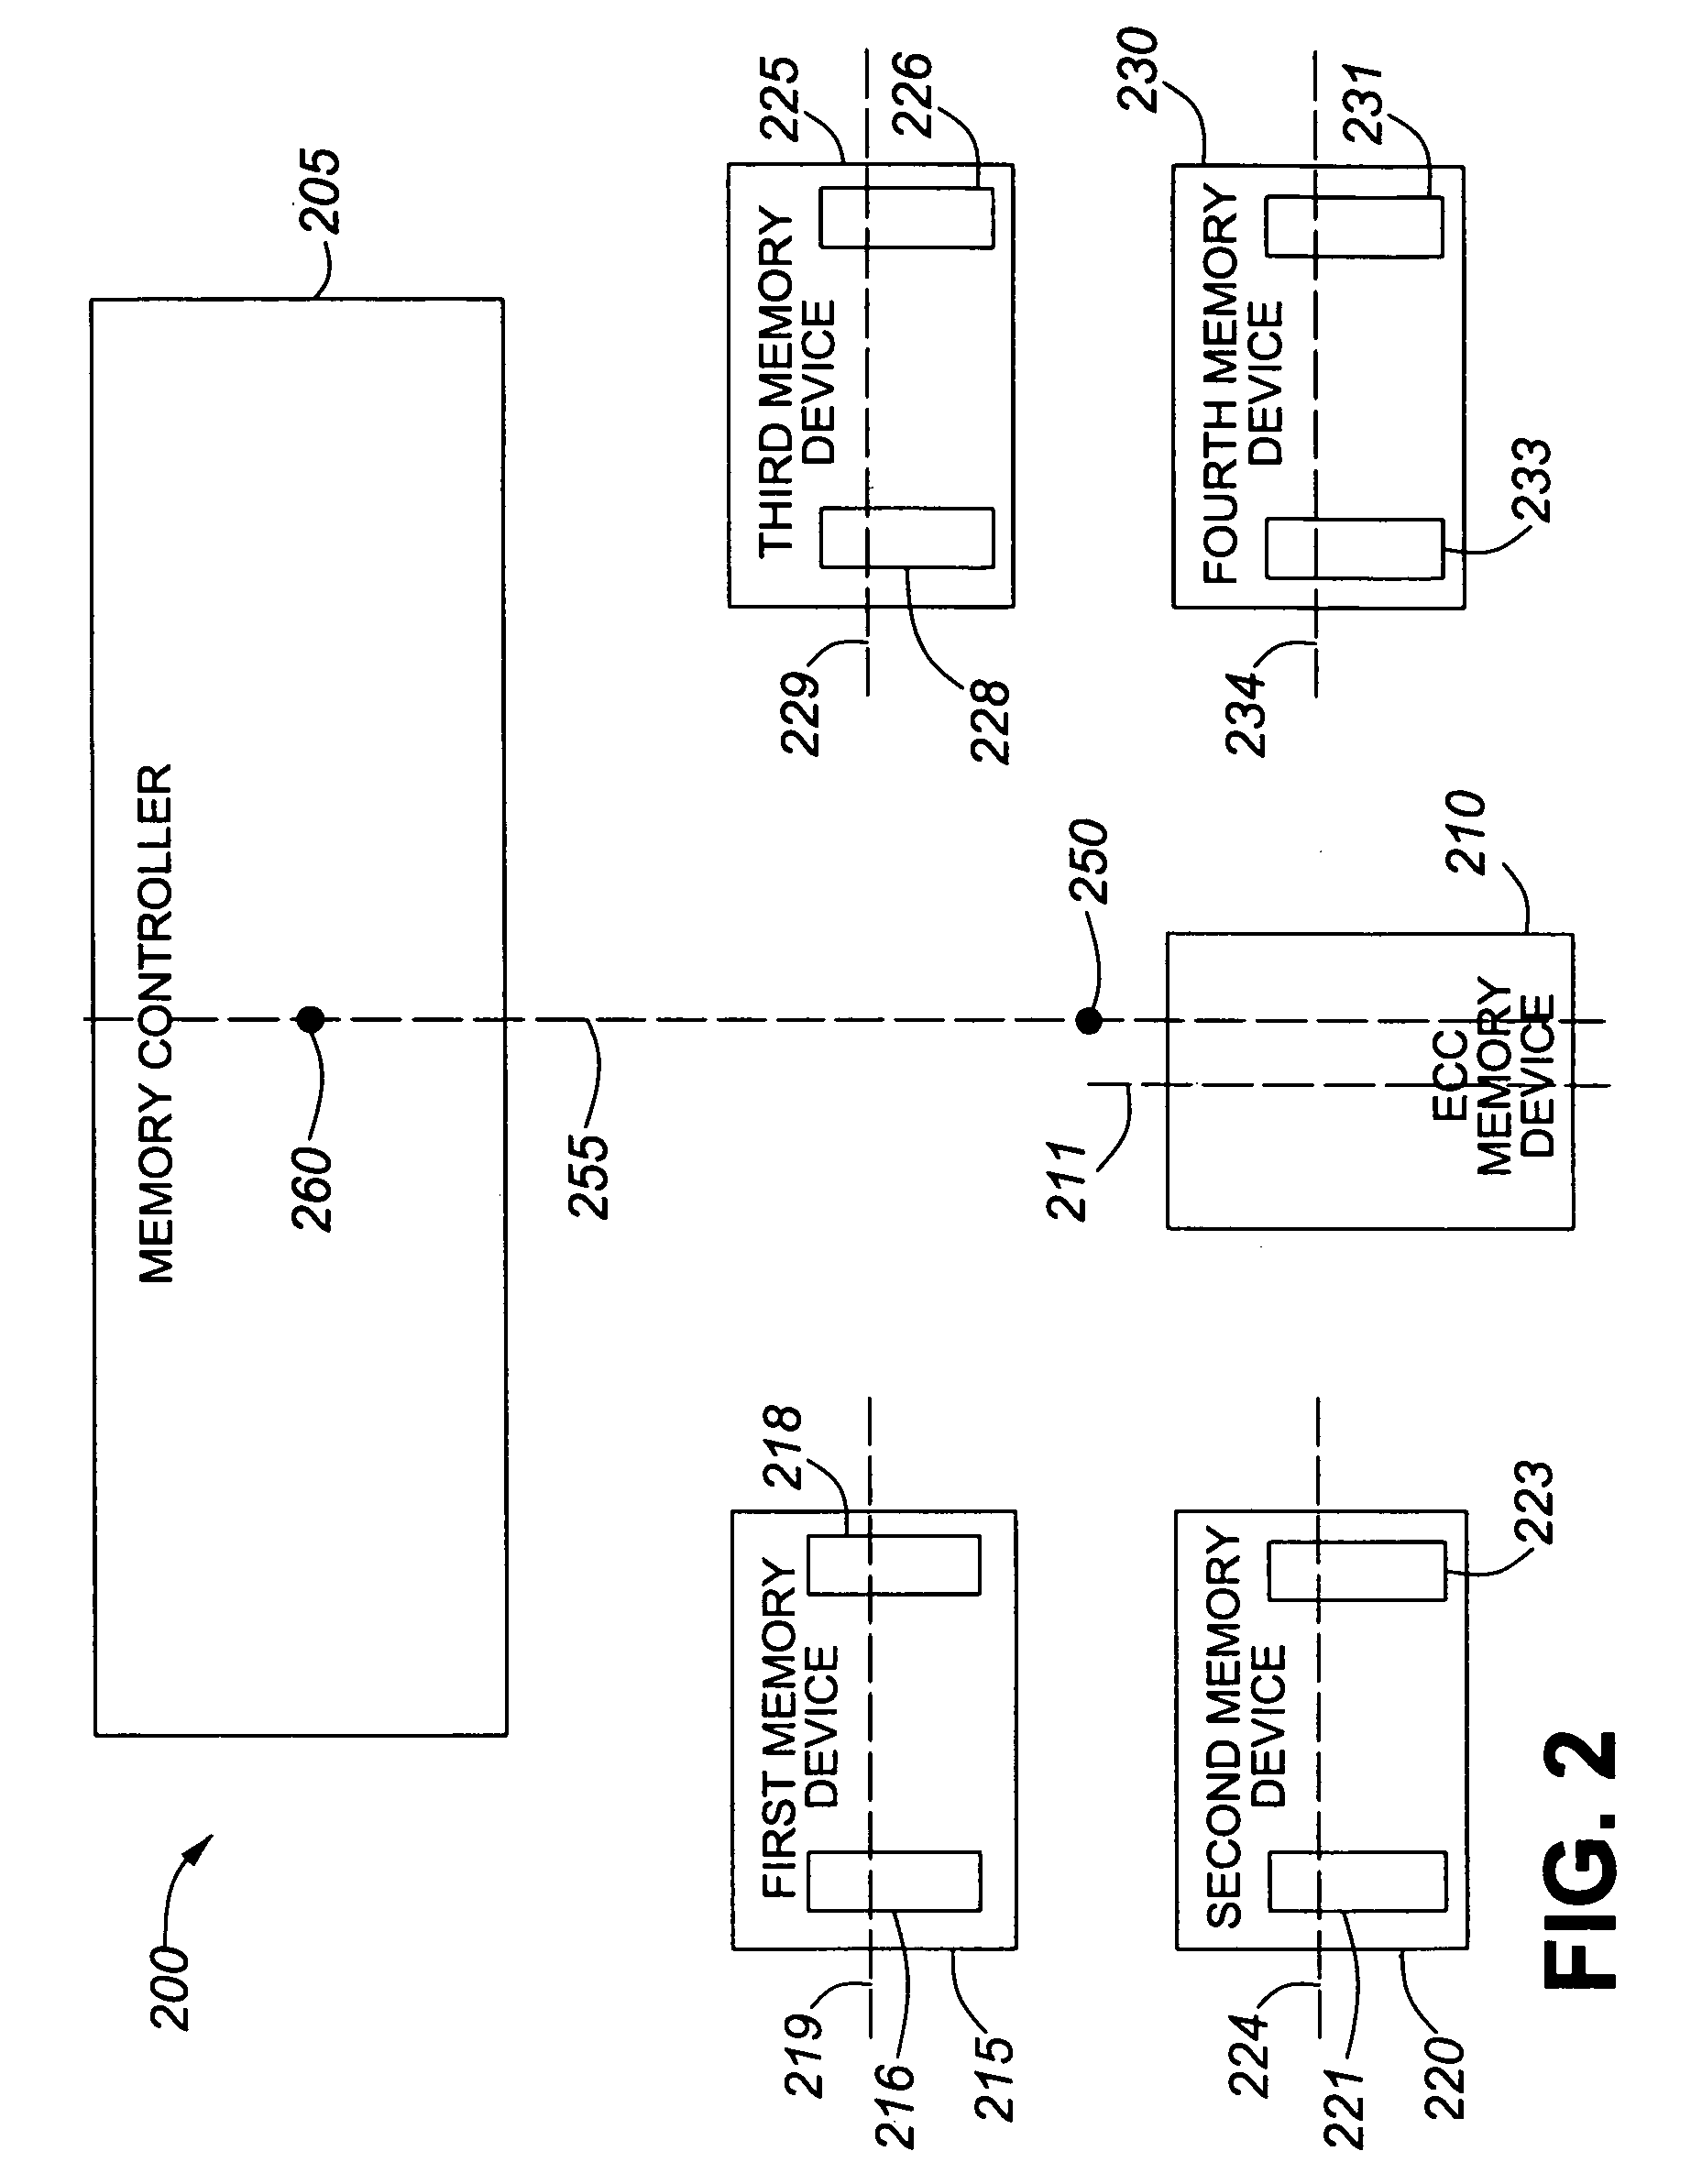 Placement and routing of ECC memory devices for improved signal timing